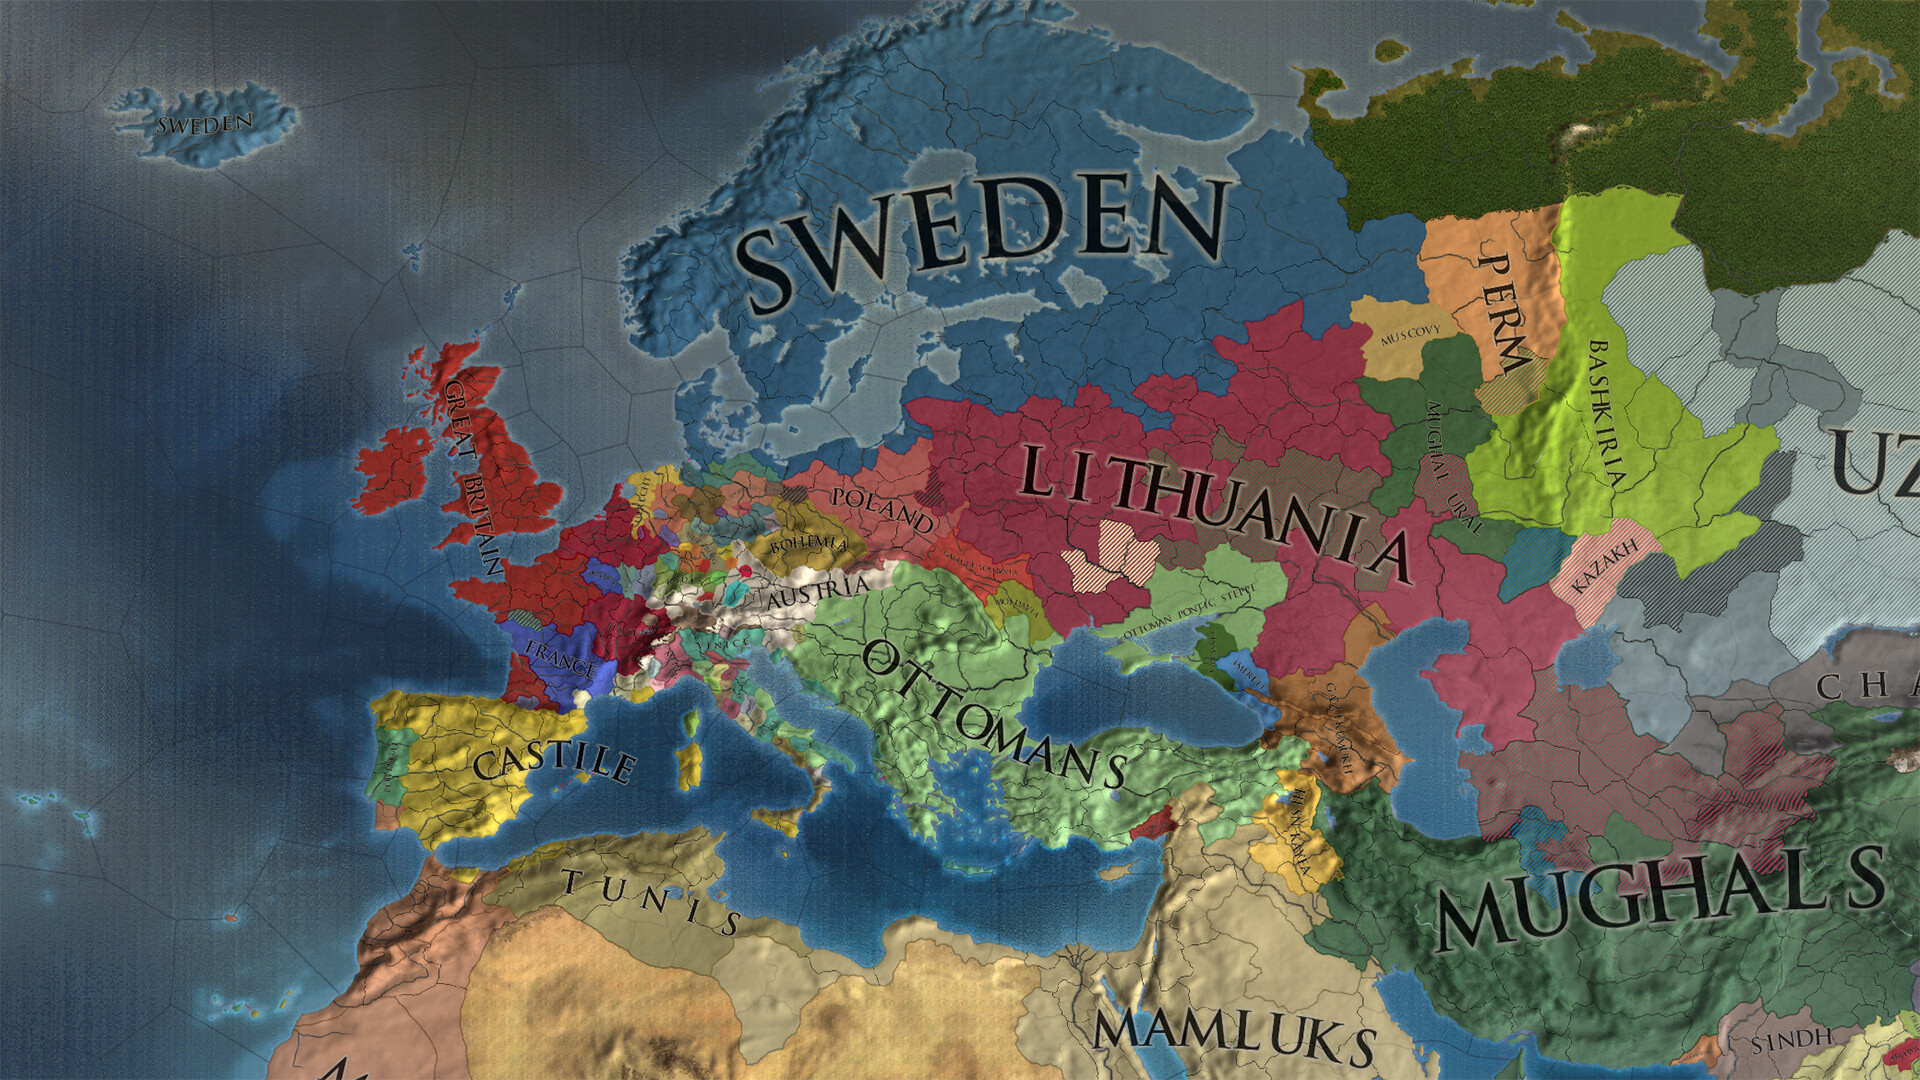 Immersion Pack - Europa Universalis IV: Lions of the North Featured Screenshot #1